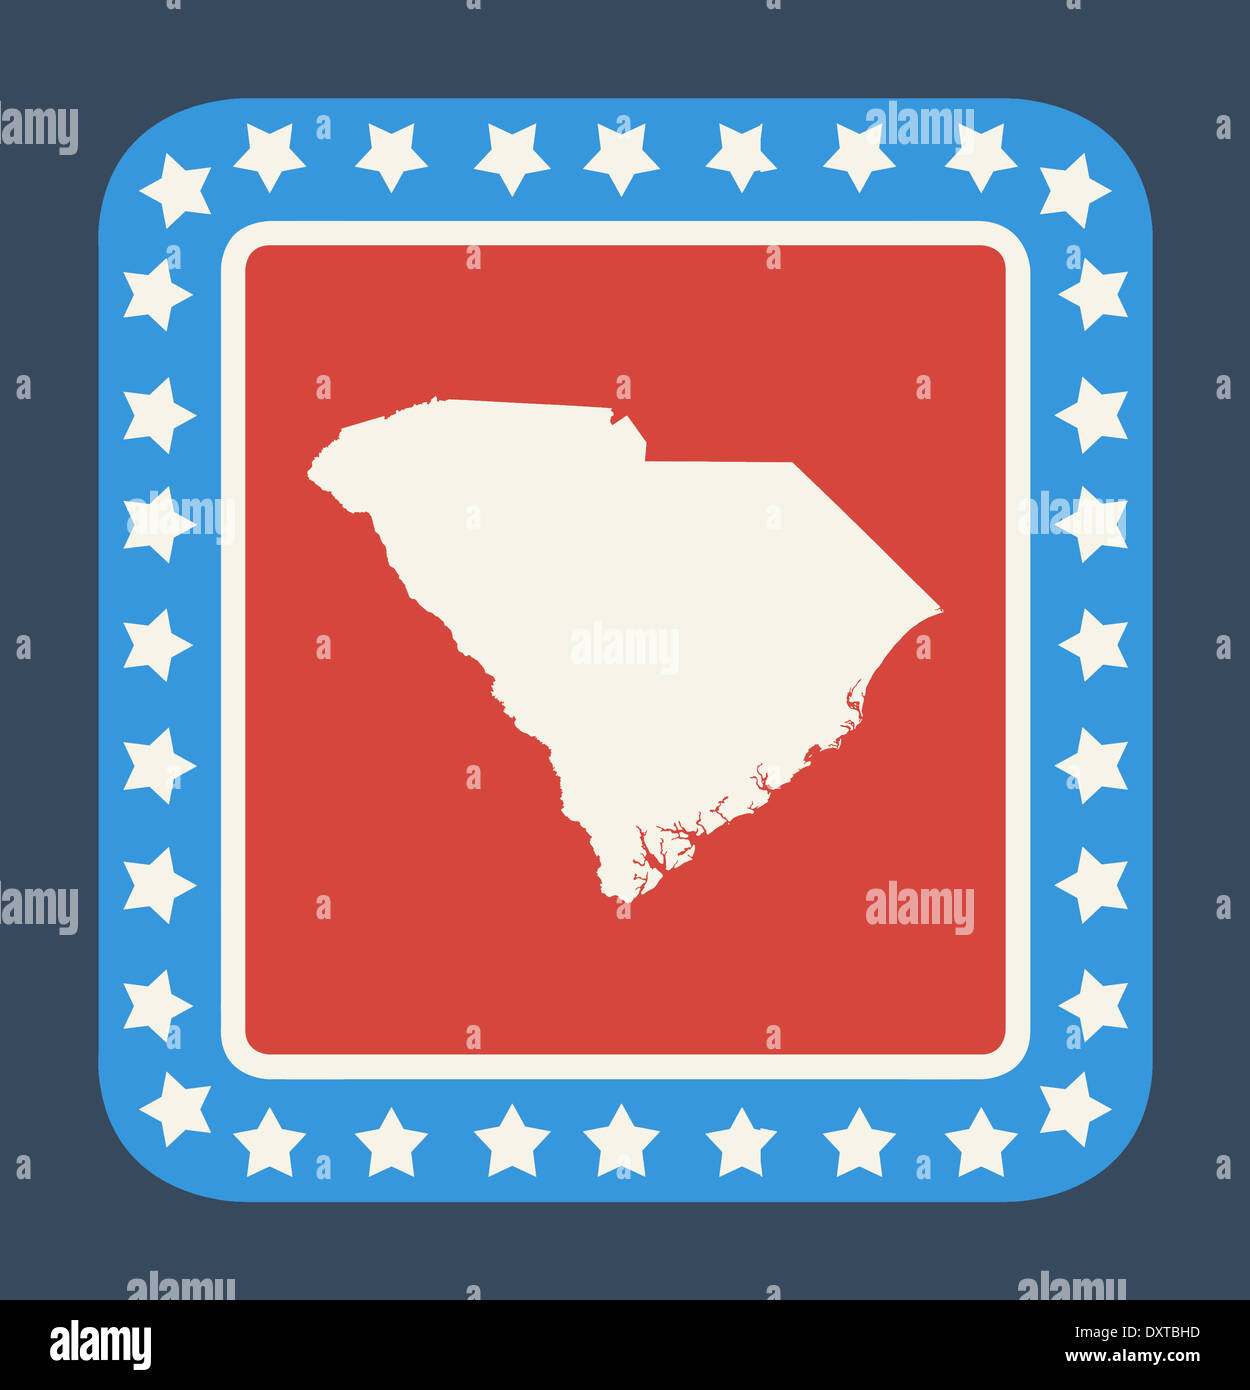 South Carolina state button on American flag in flat web design style, isolated on white background. Stock Photo